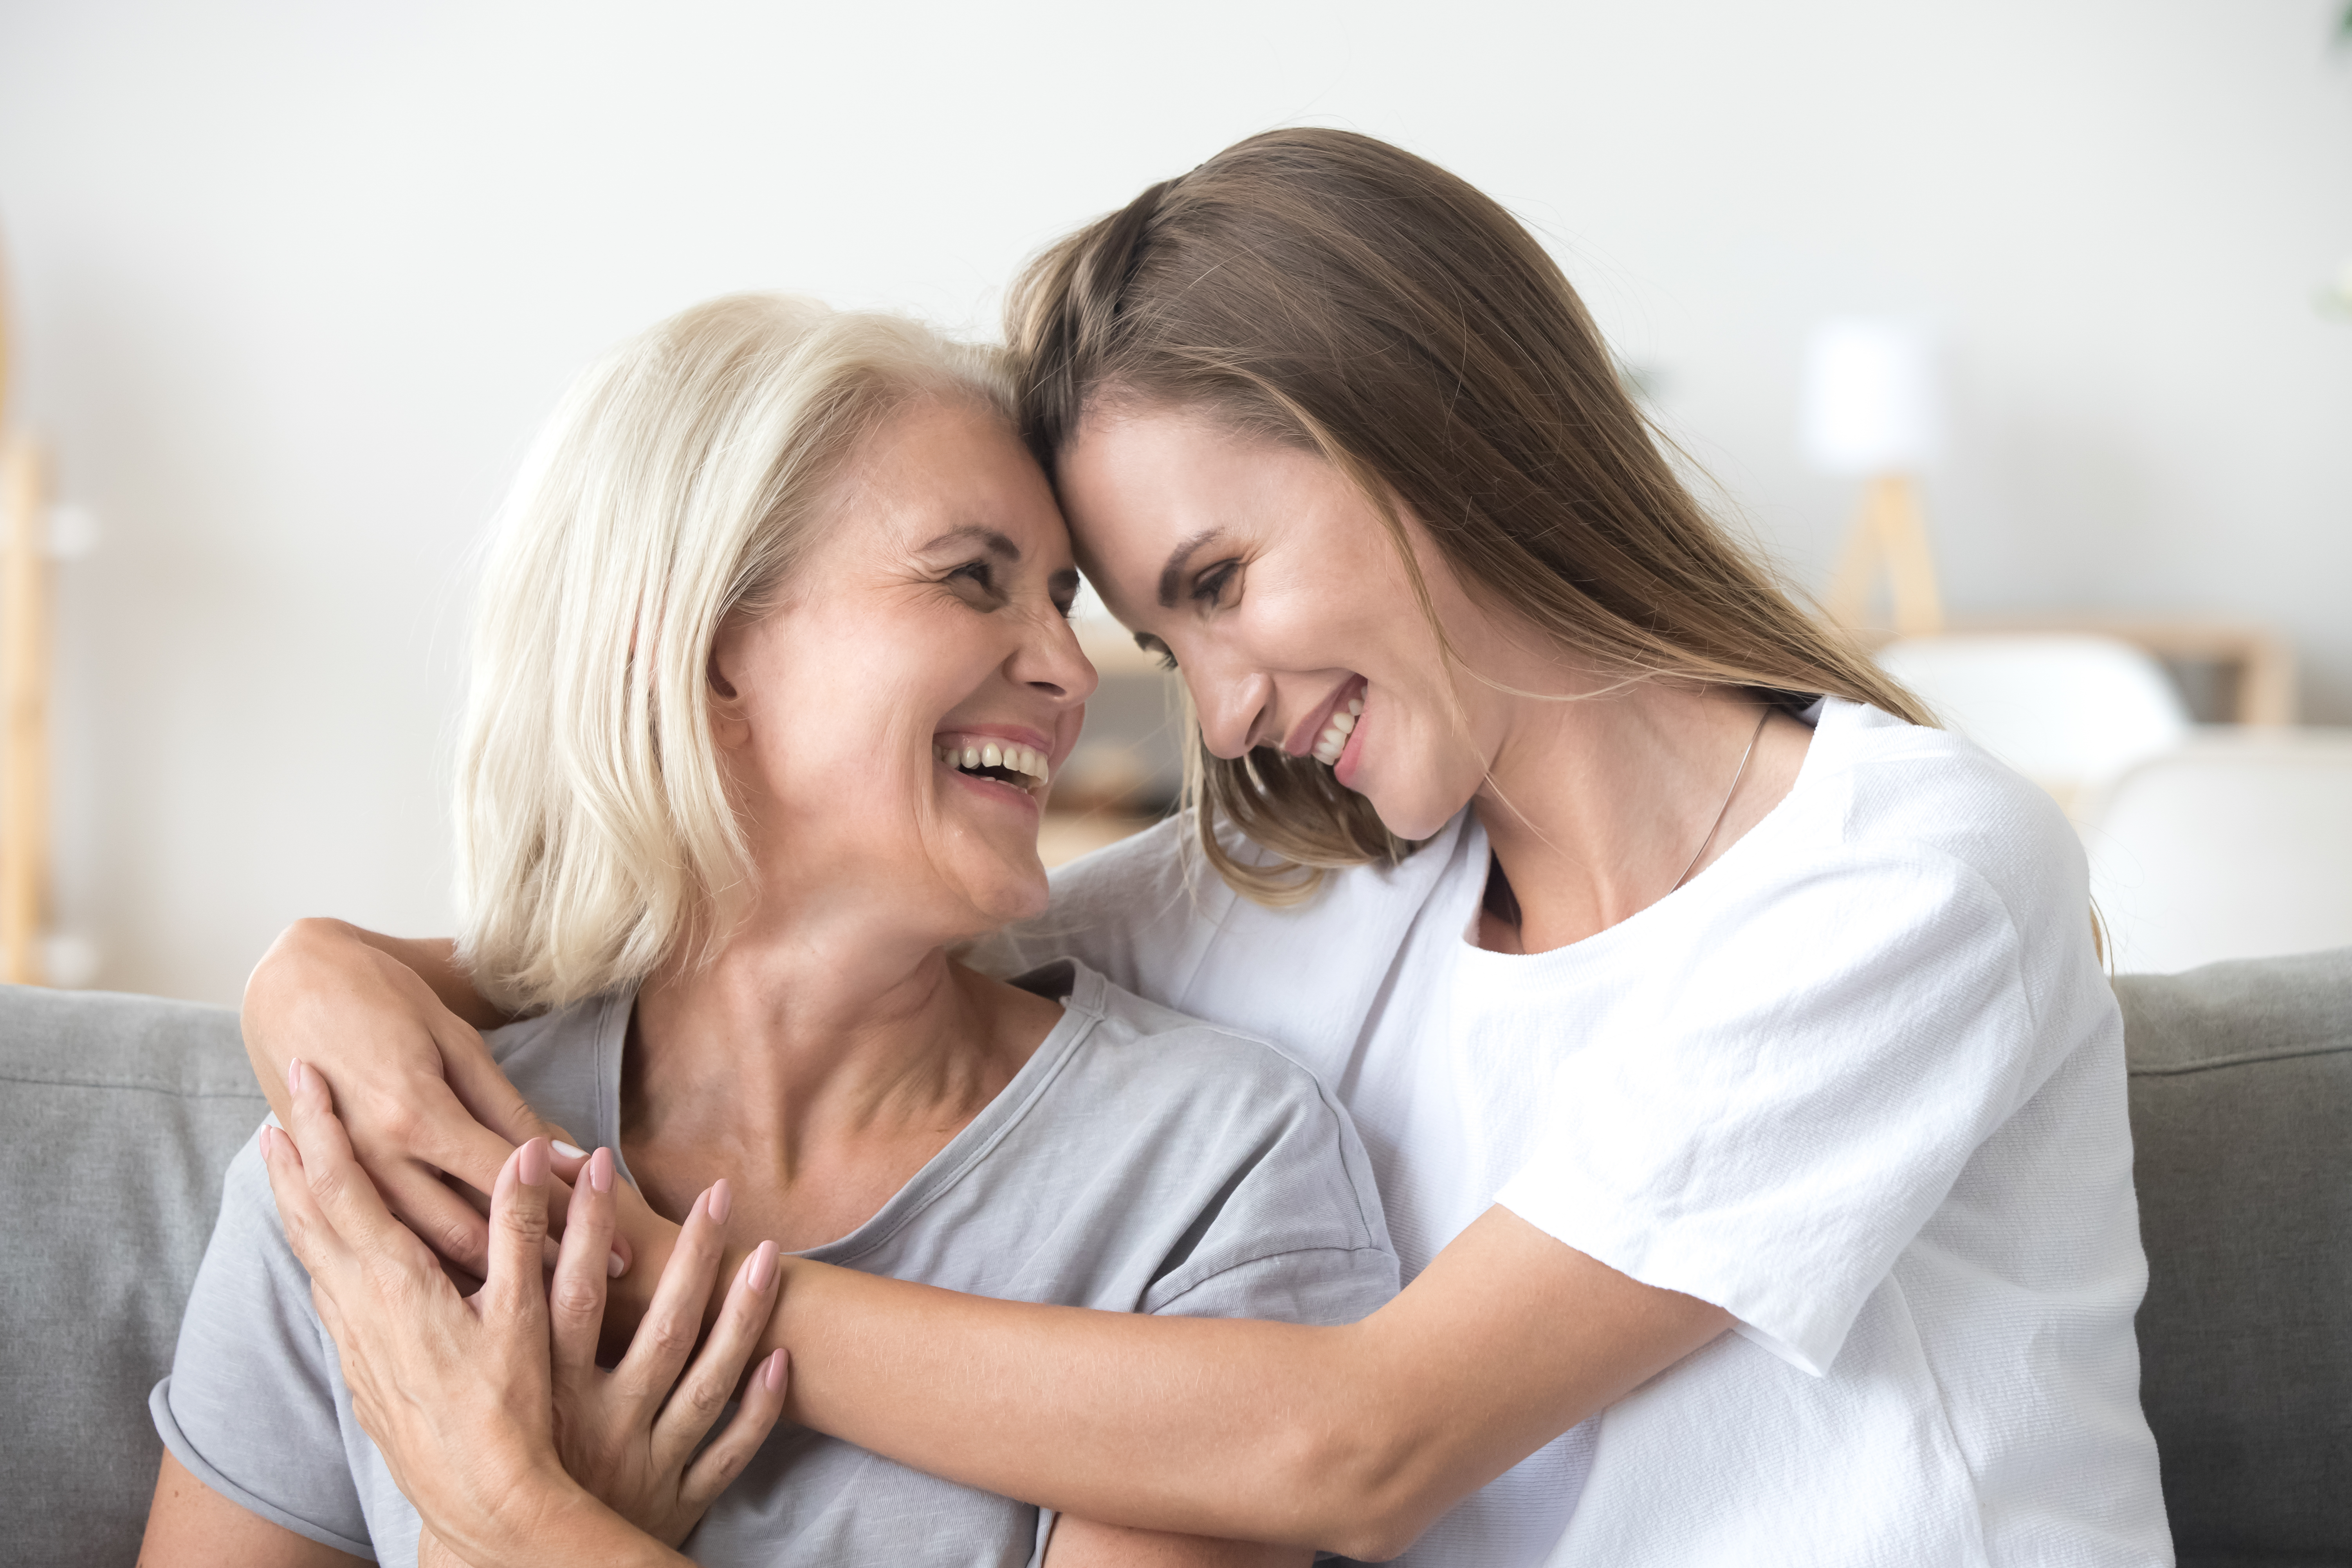 A mother and daughter looking happy  | Source: Shutterstock